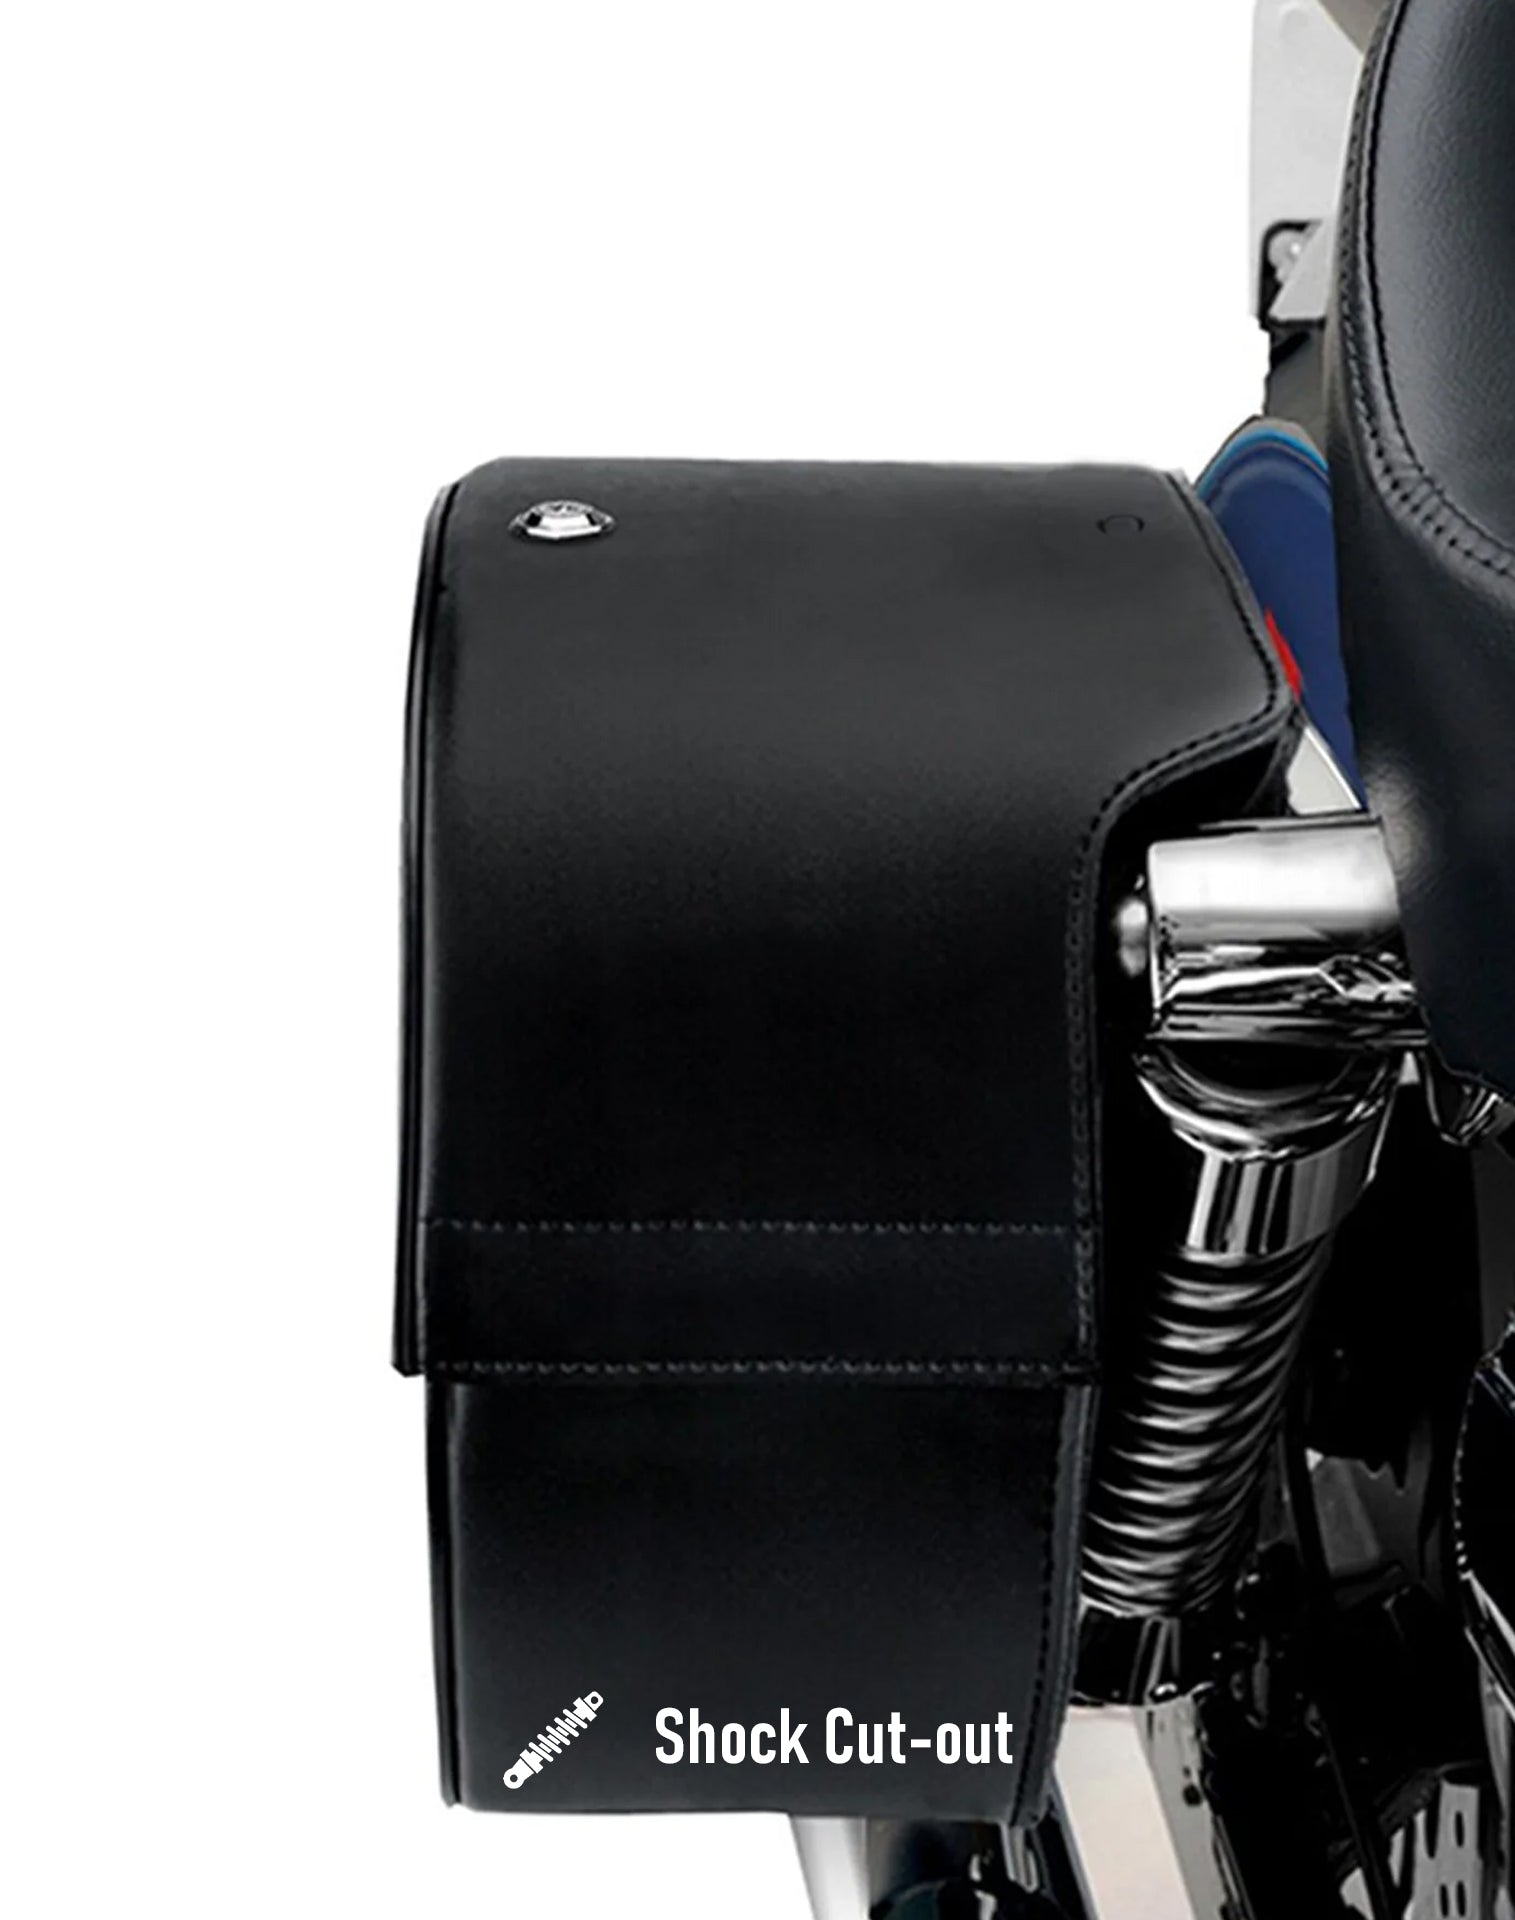 Viking Skarner Large Triumph America Shock Cut Out Leather Motorcycle Saddlebags Hard Shell Construction